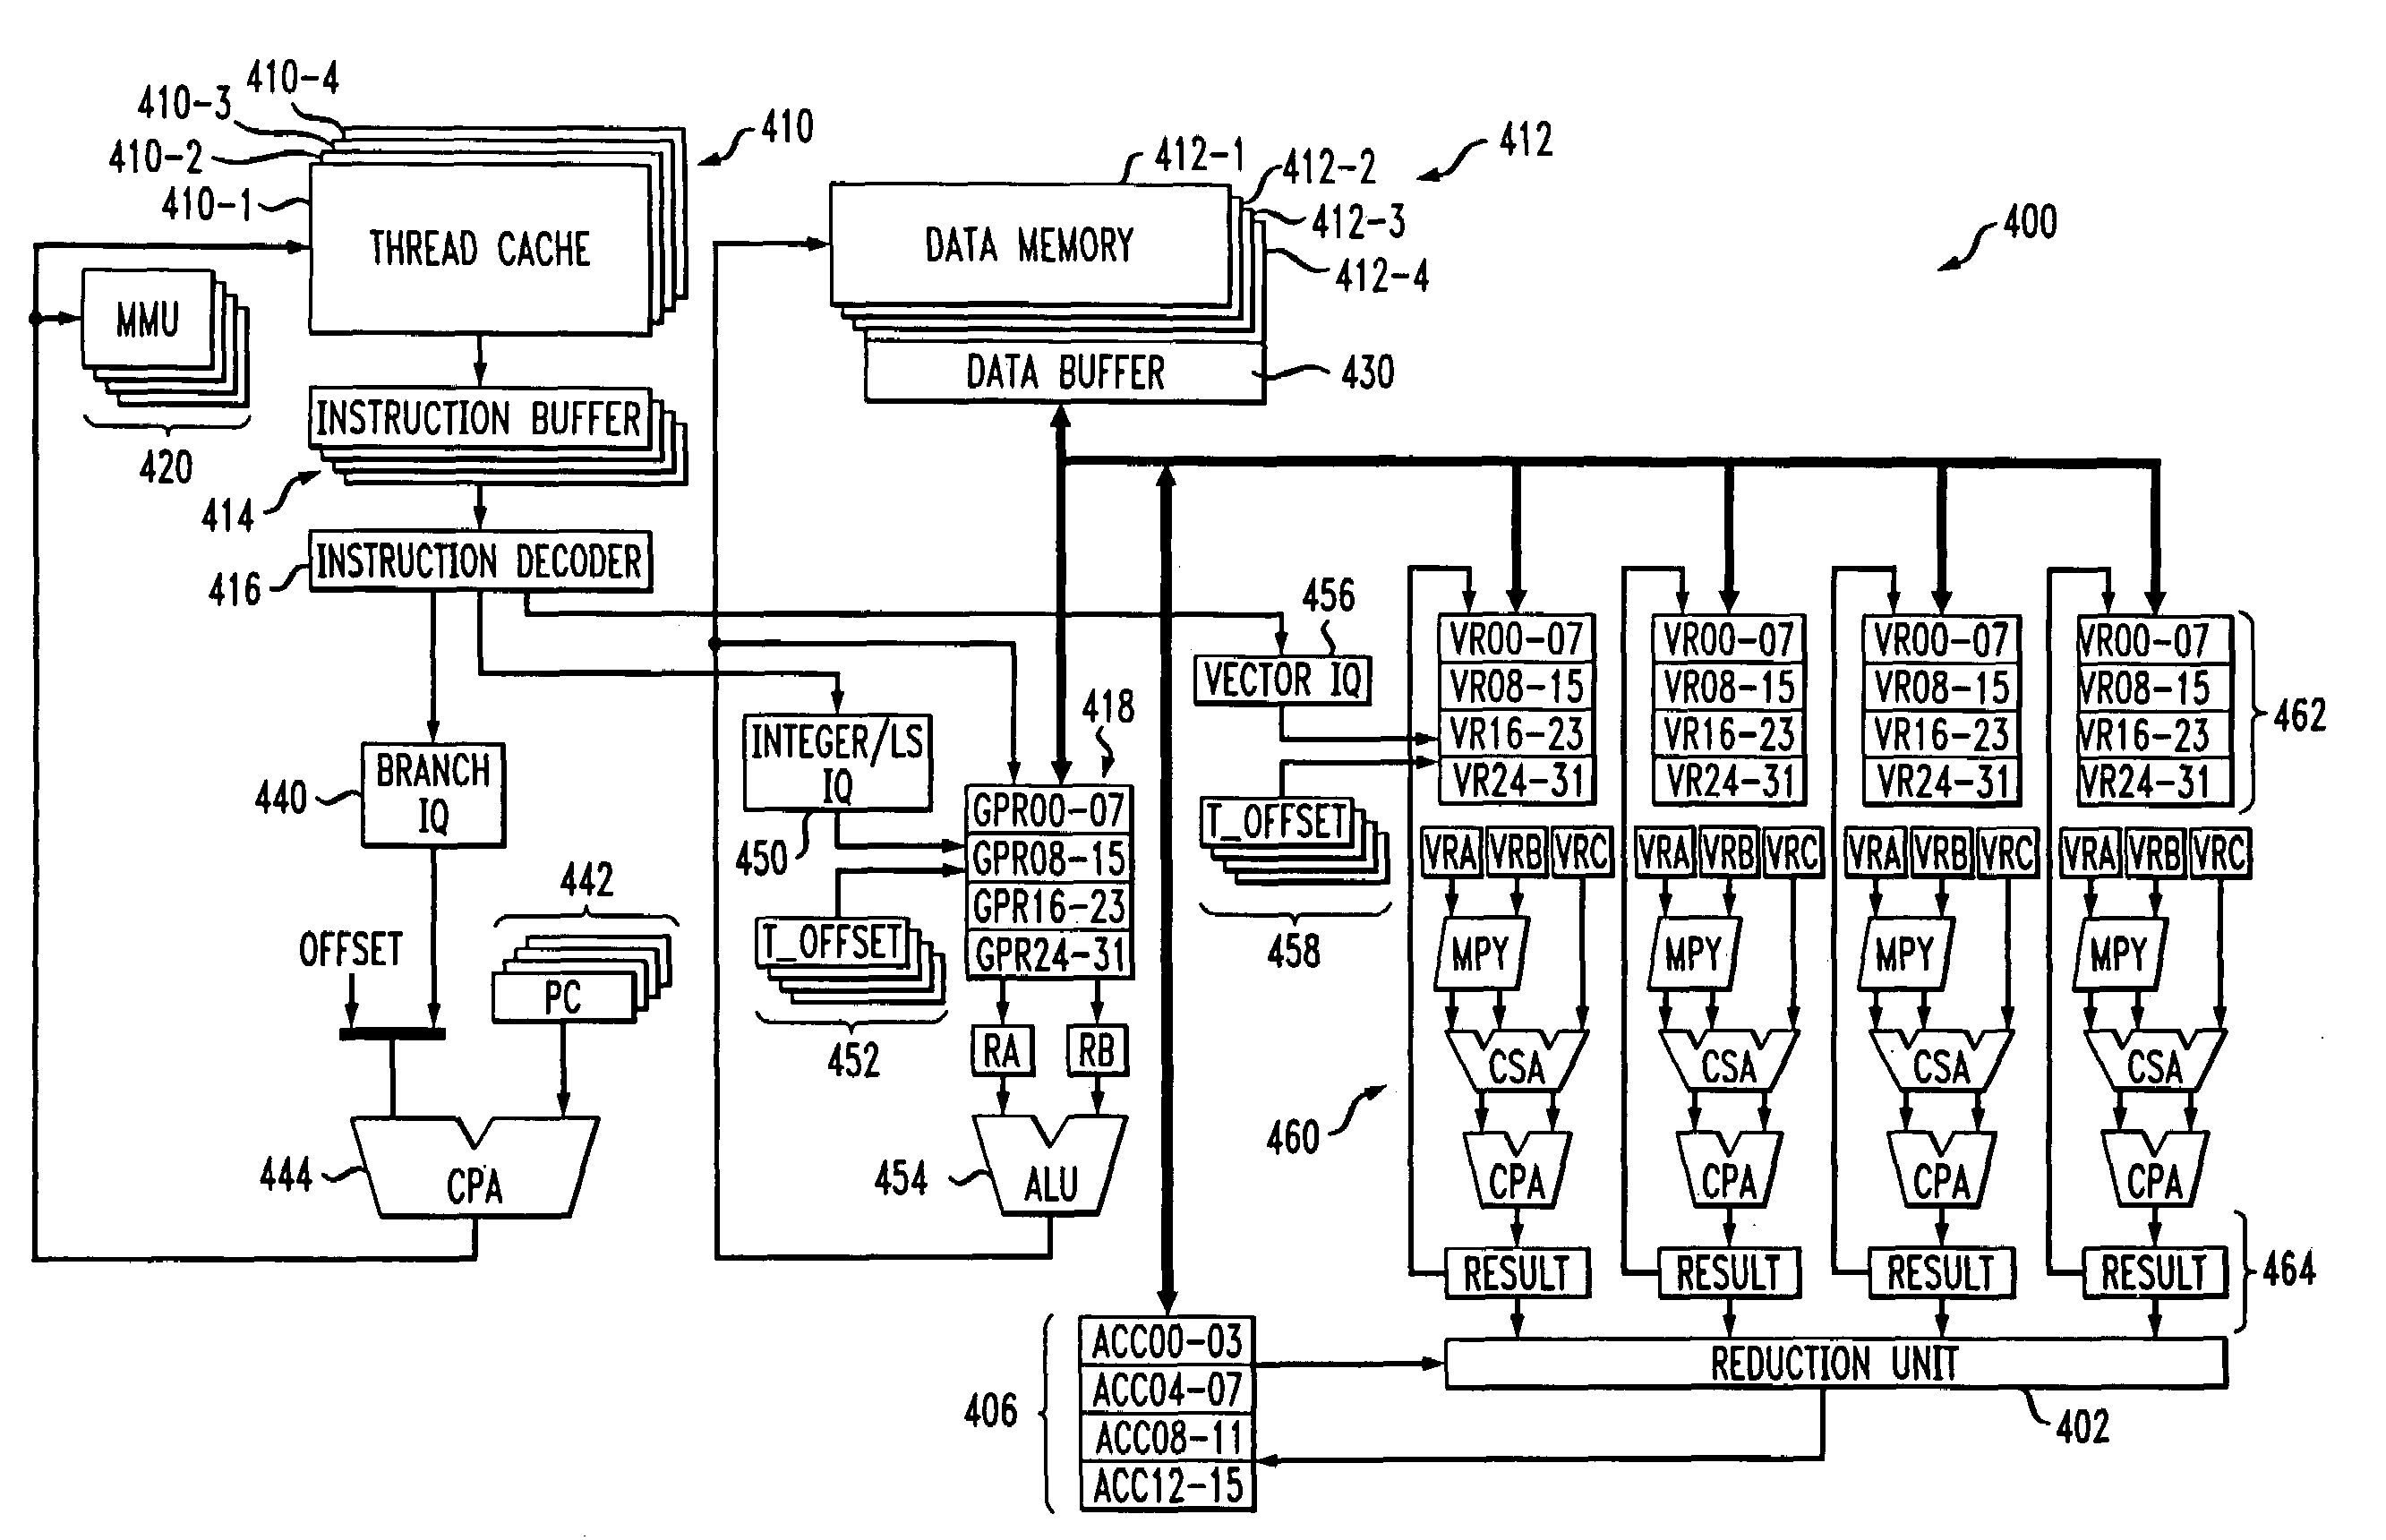 Multi-threaded processor having compound instruction and operation formats